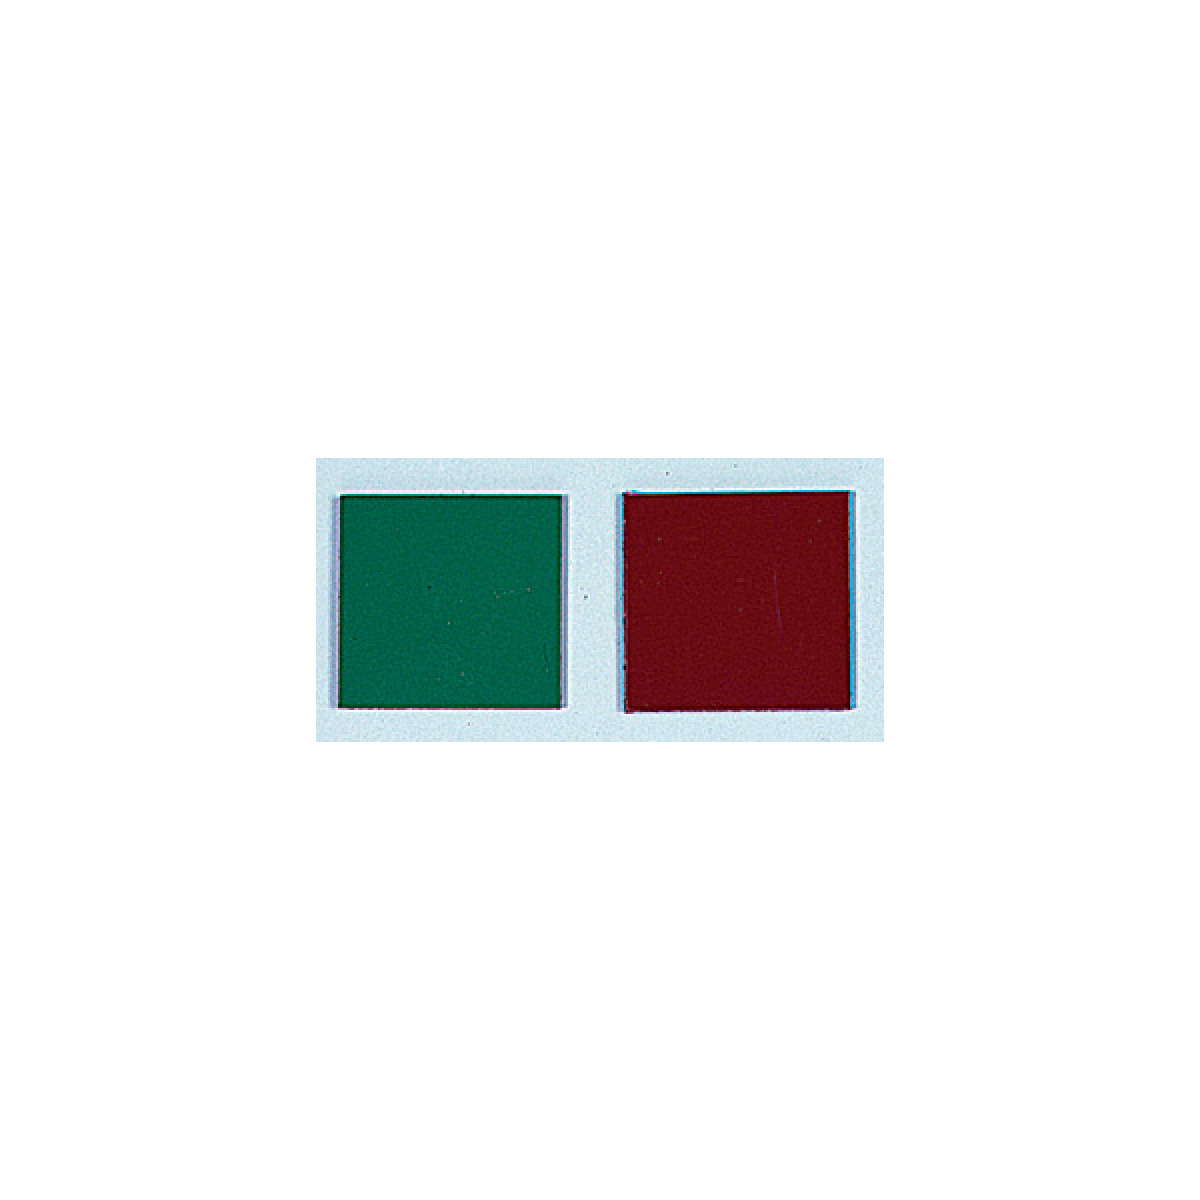 double-sided whiteboard magnet in red and green